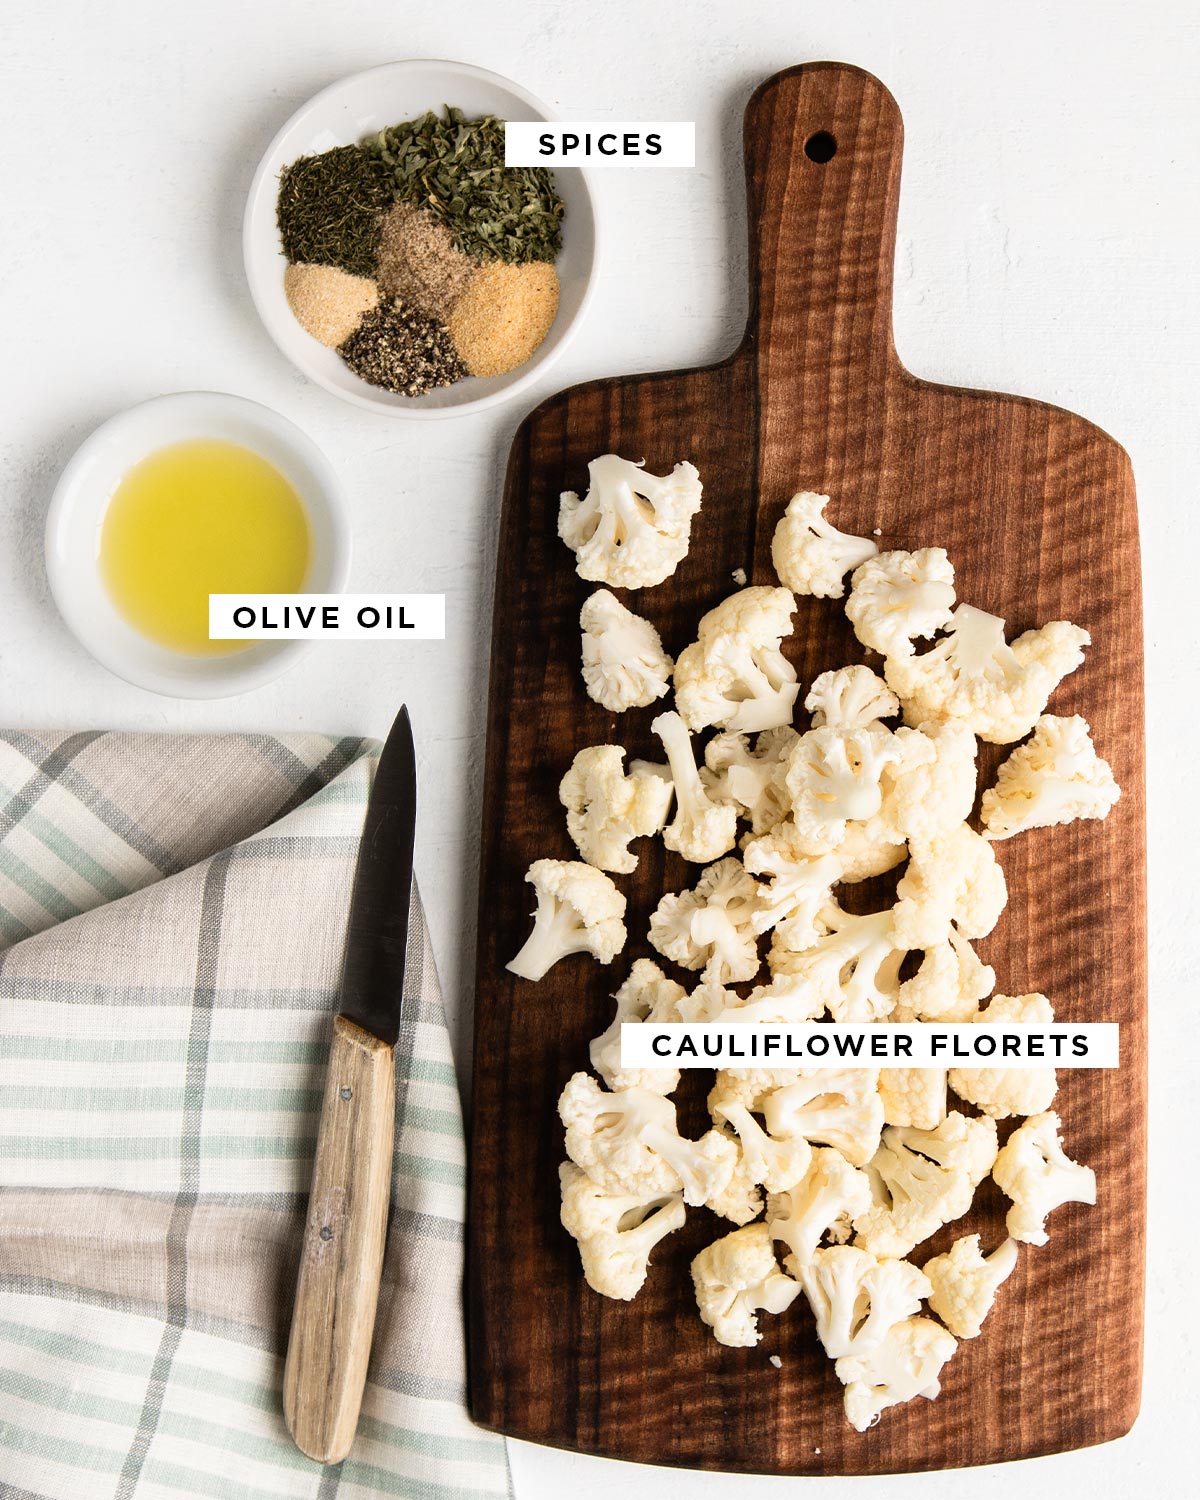 labeled ingredients for healthy snack including spices in a white bowl, olive oil in similar bowl and cauliflower florets on a wooden cutting board.